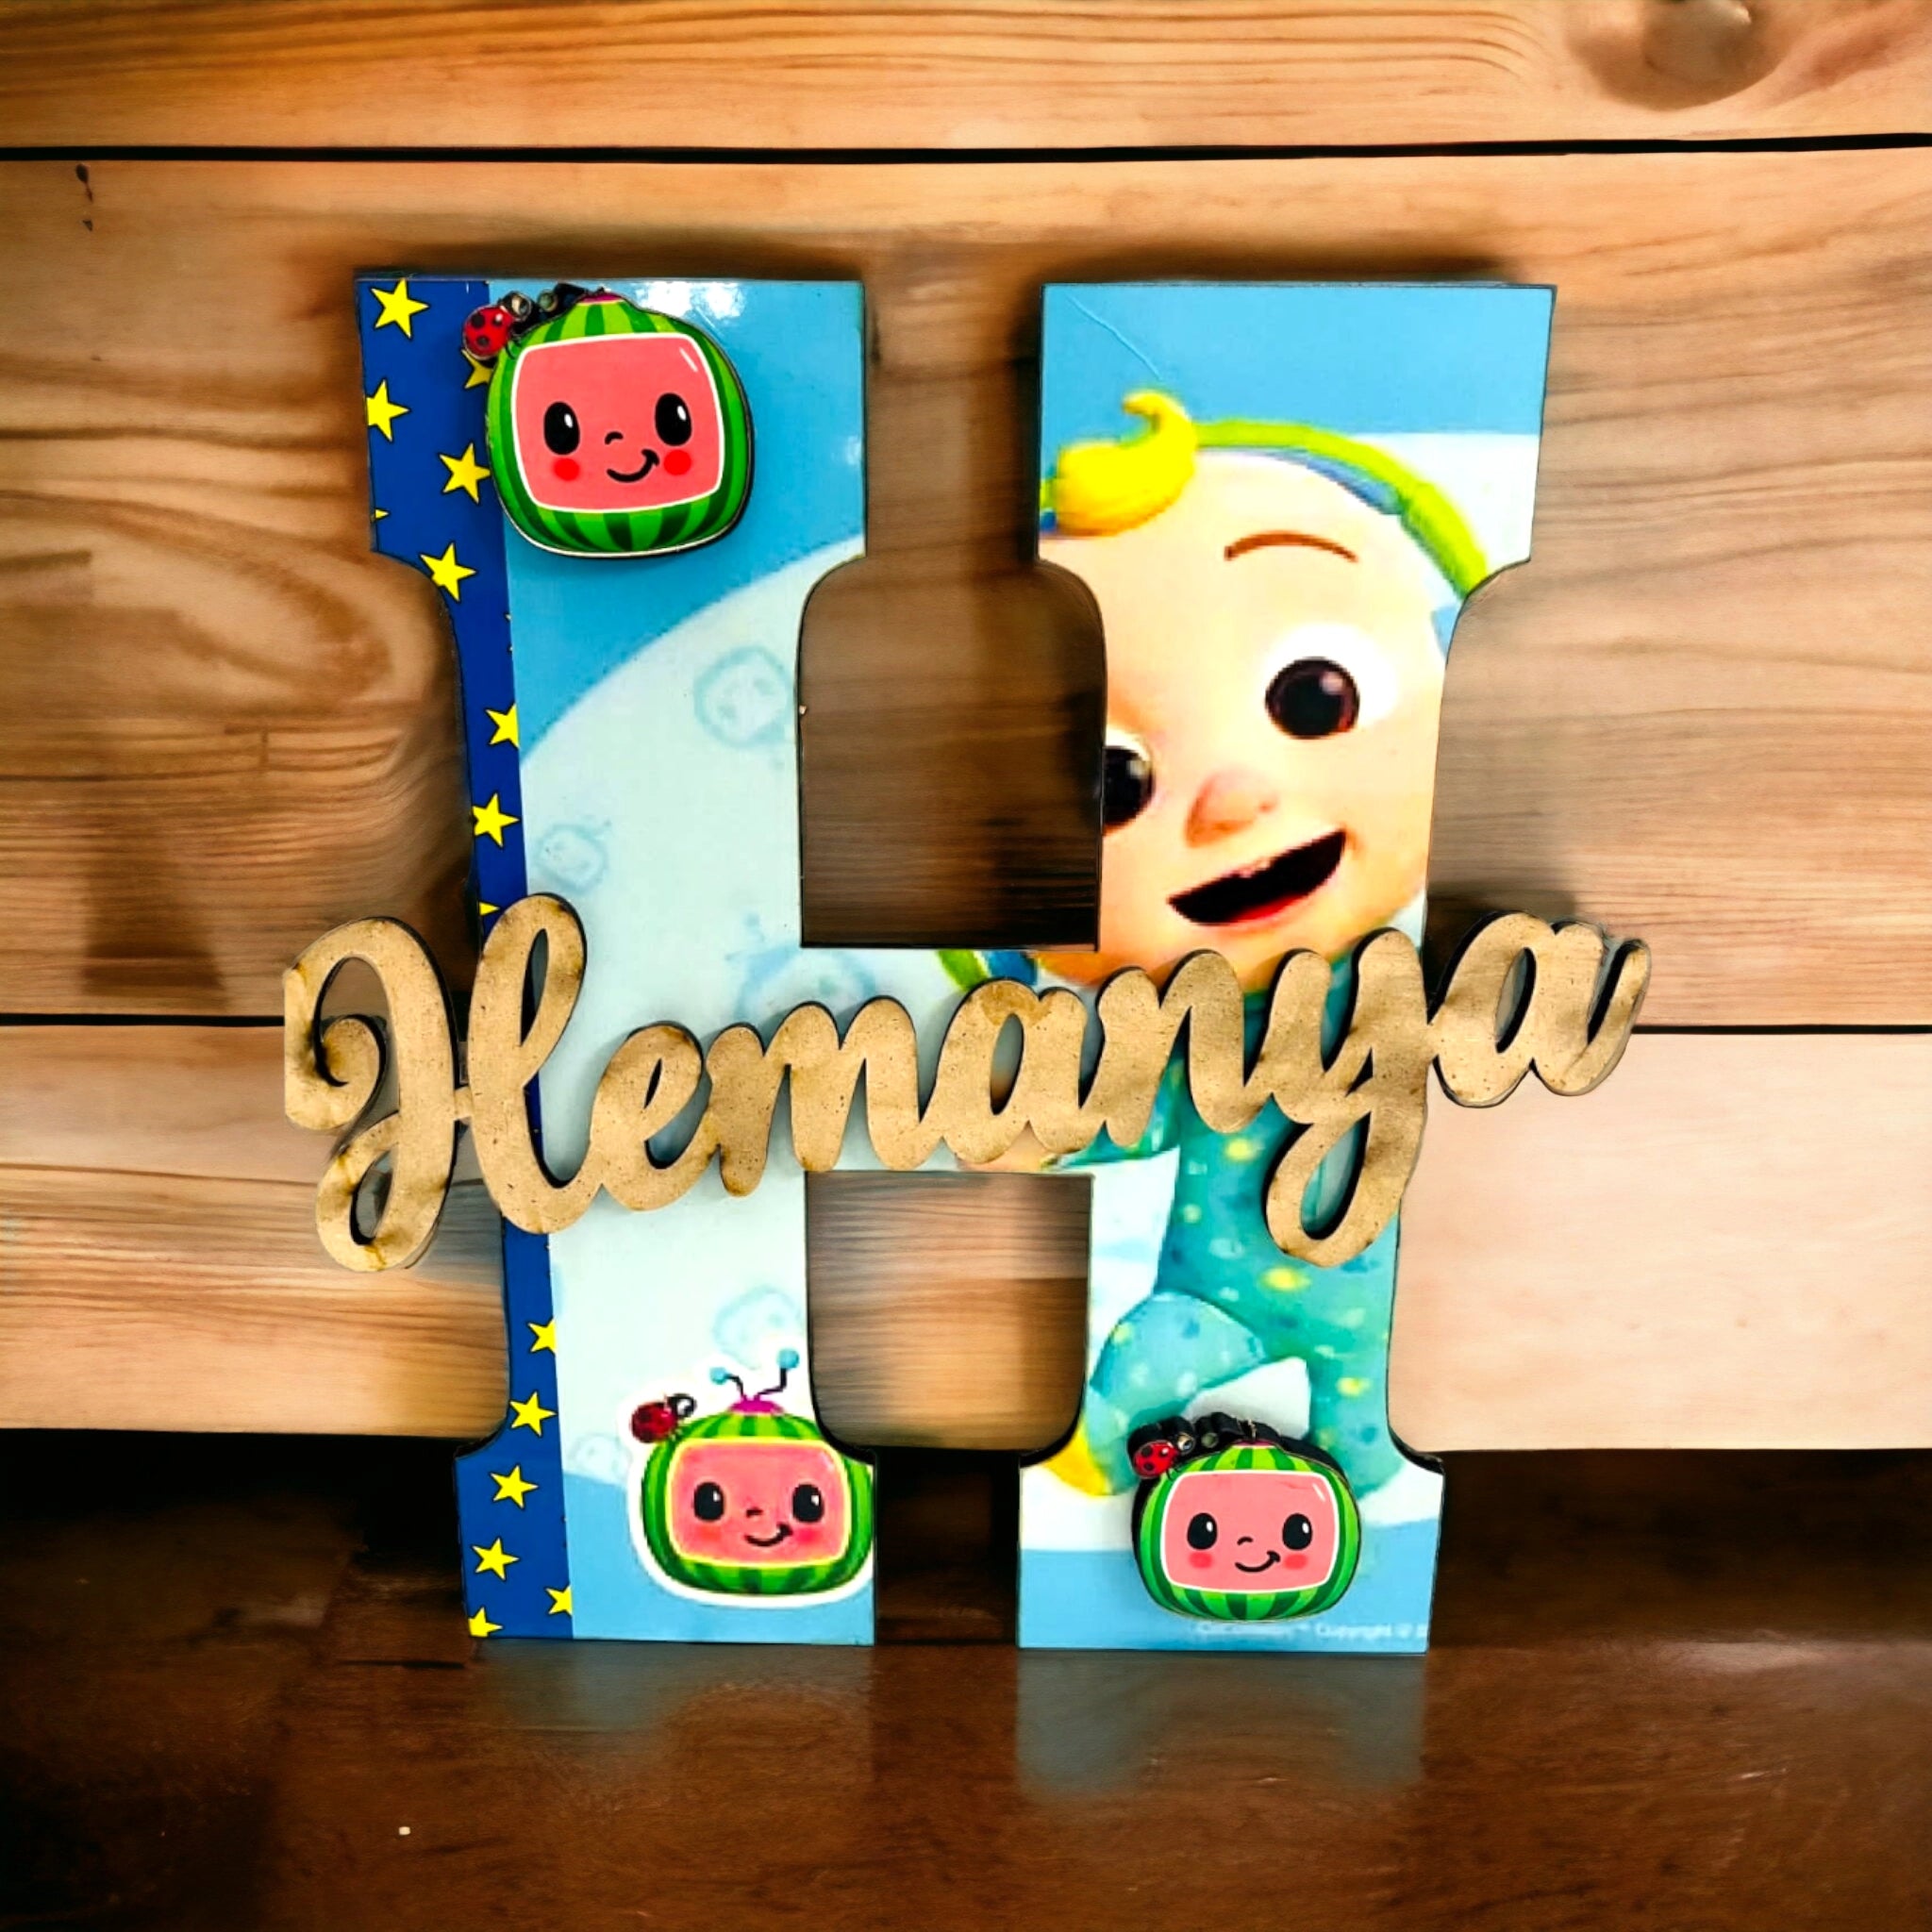 Creative Personalized Gifts For Kids That Also Make Great Birthday Gifts